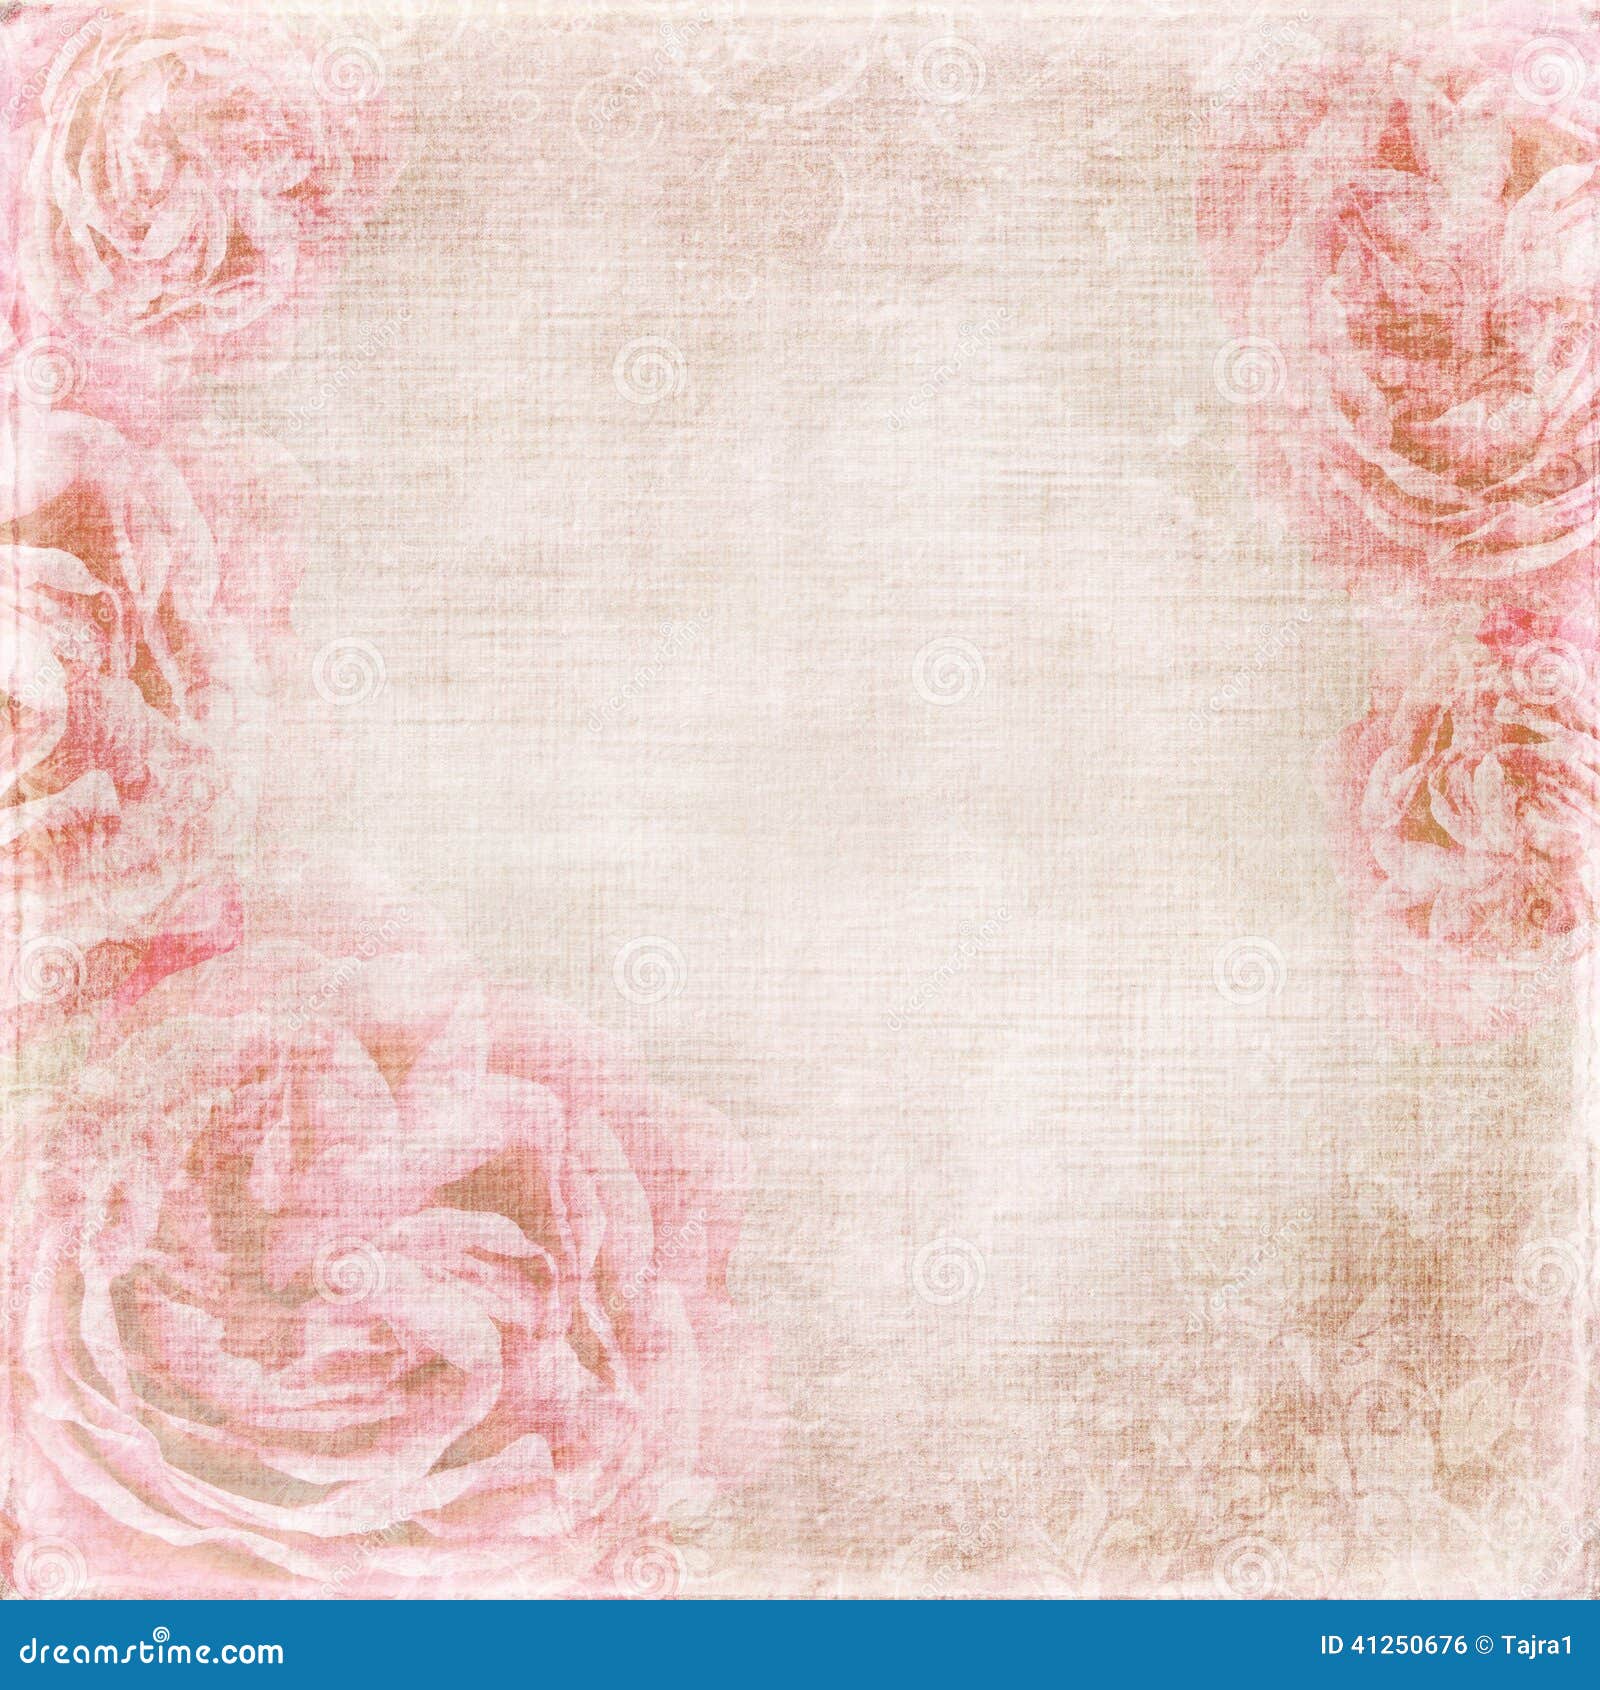 Vintage Texture Background Stock Photo Image Of Floral 41250676